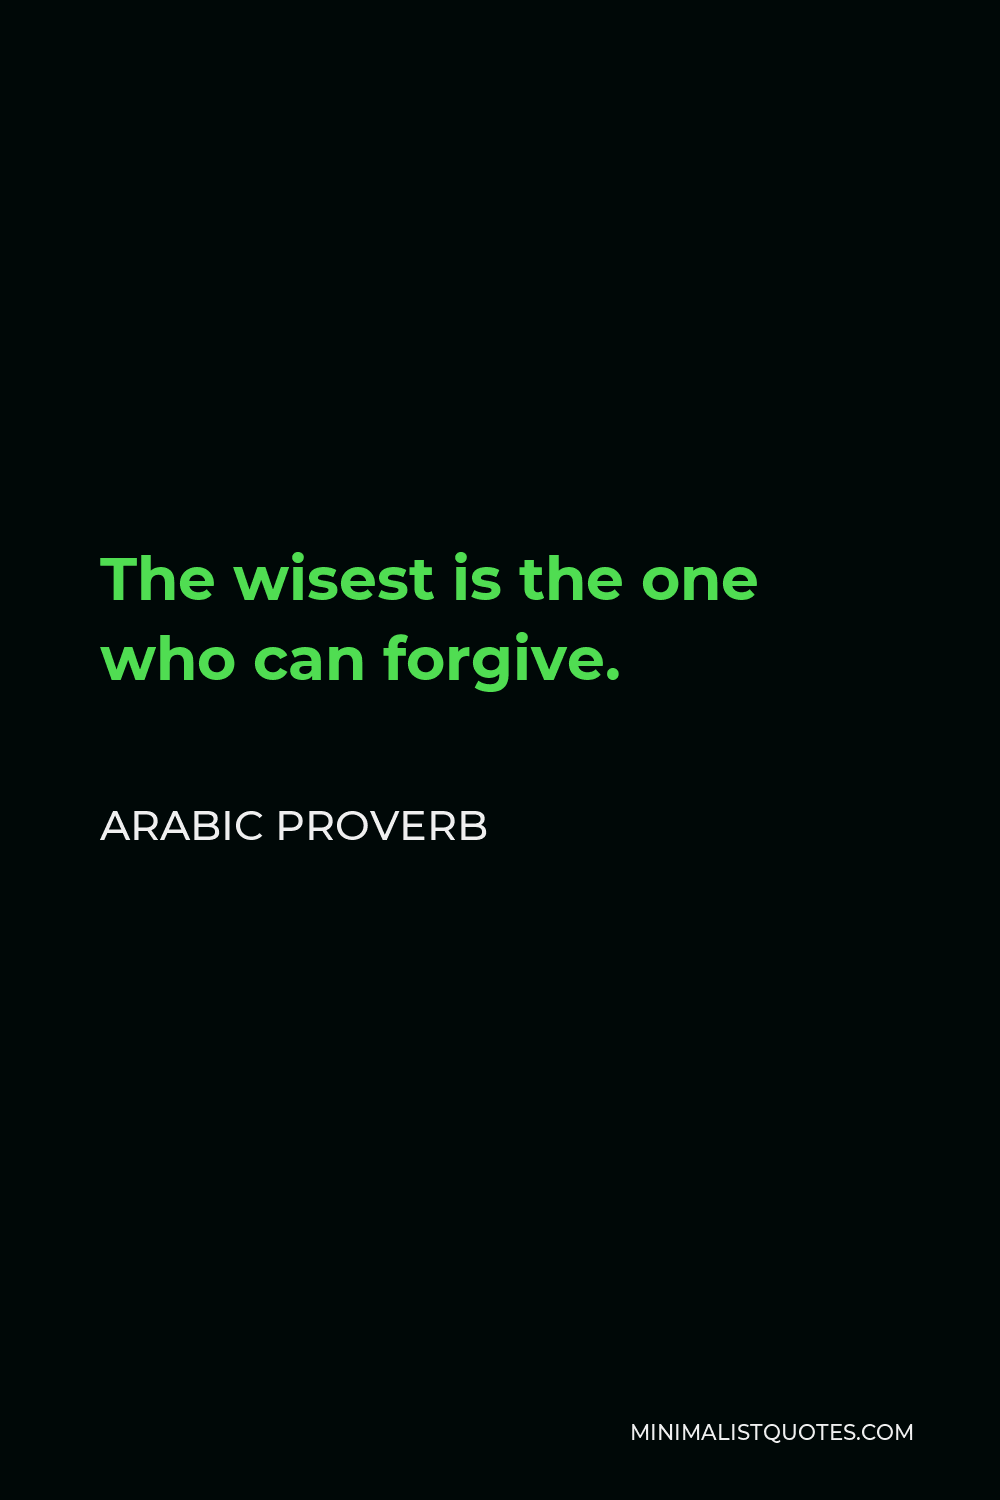 Arabic Proverb Quote - The wisest is the one who can forgive.